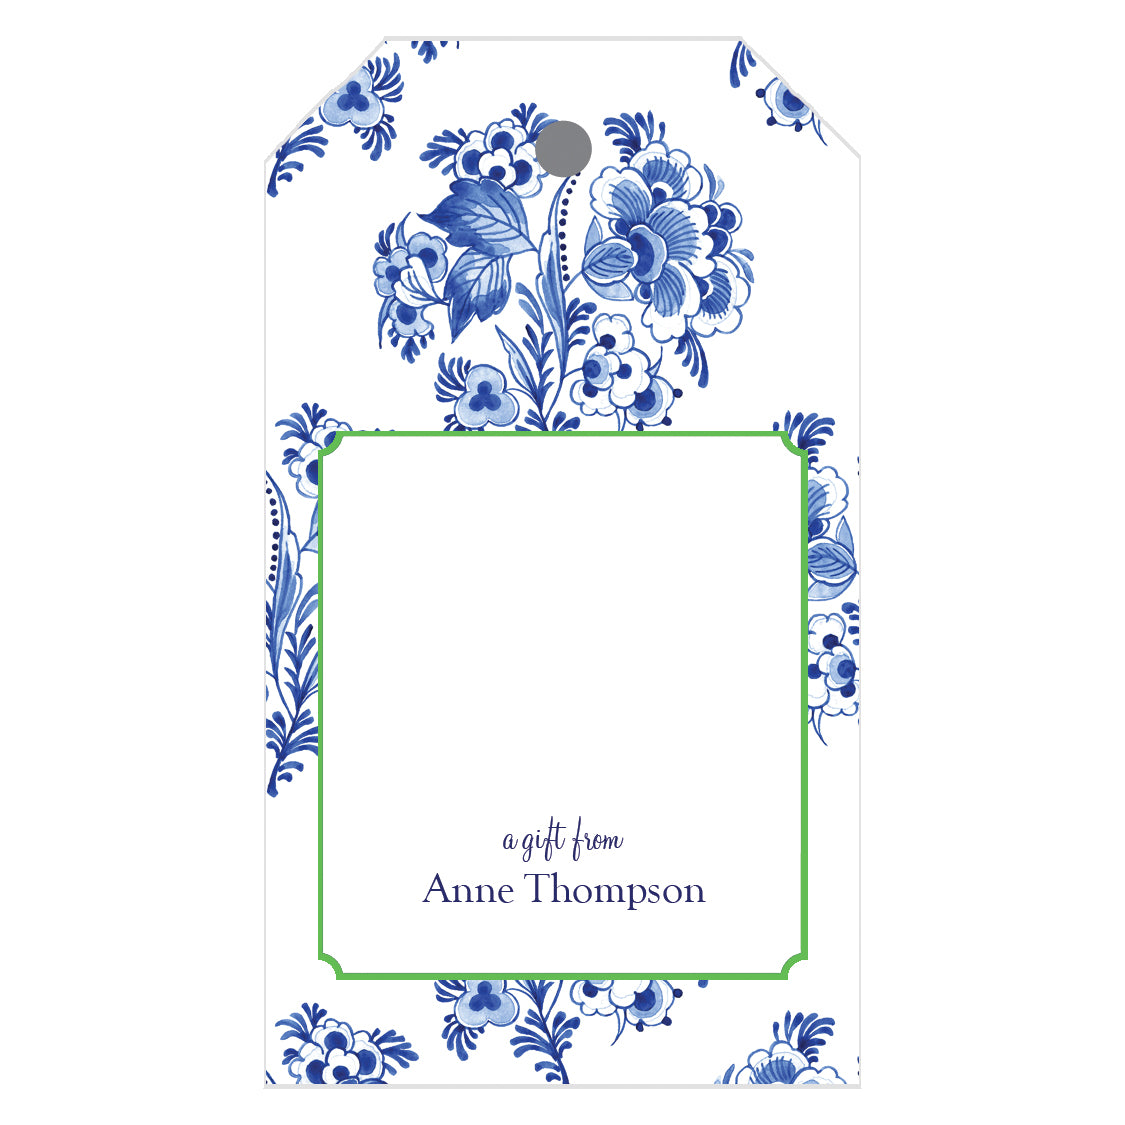 Wholesale Blue and White Floral Motif Block Print Personalized Gift Tags